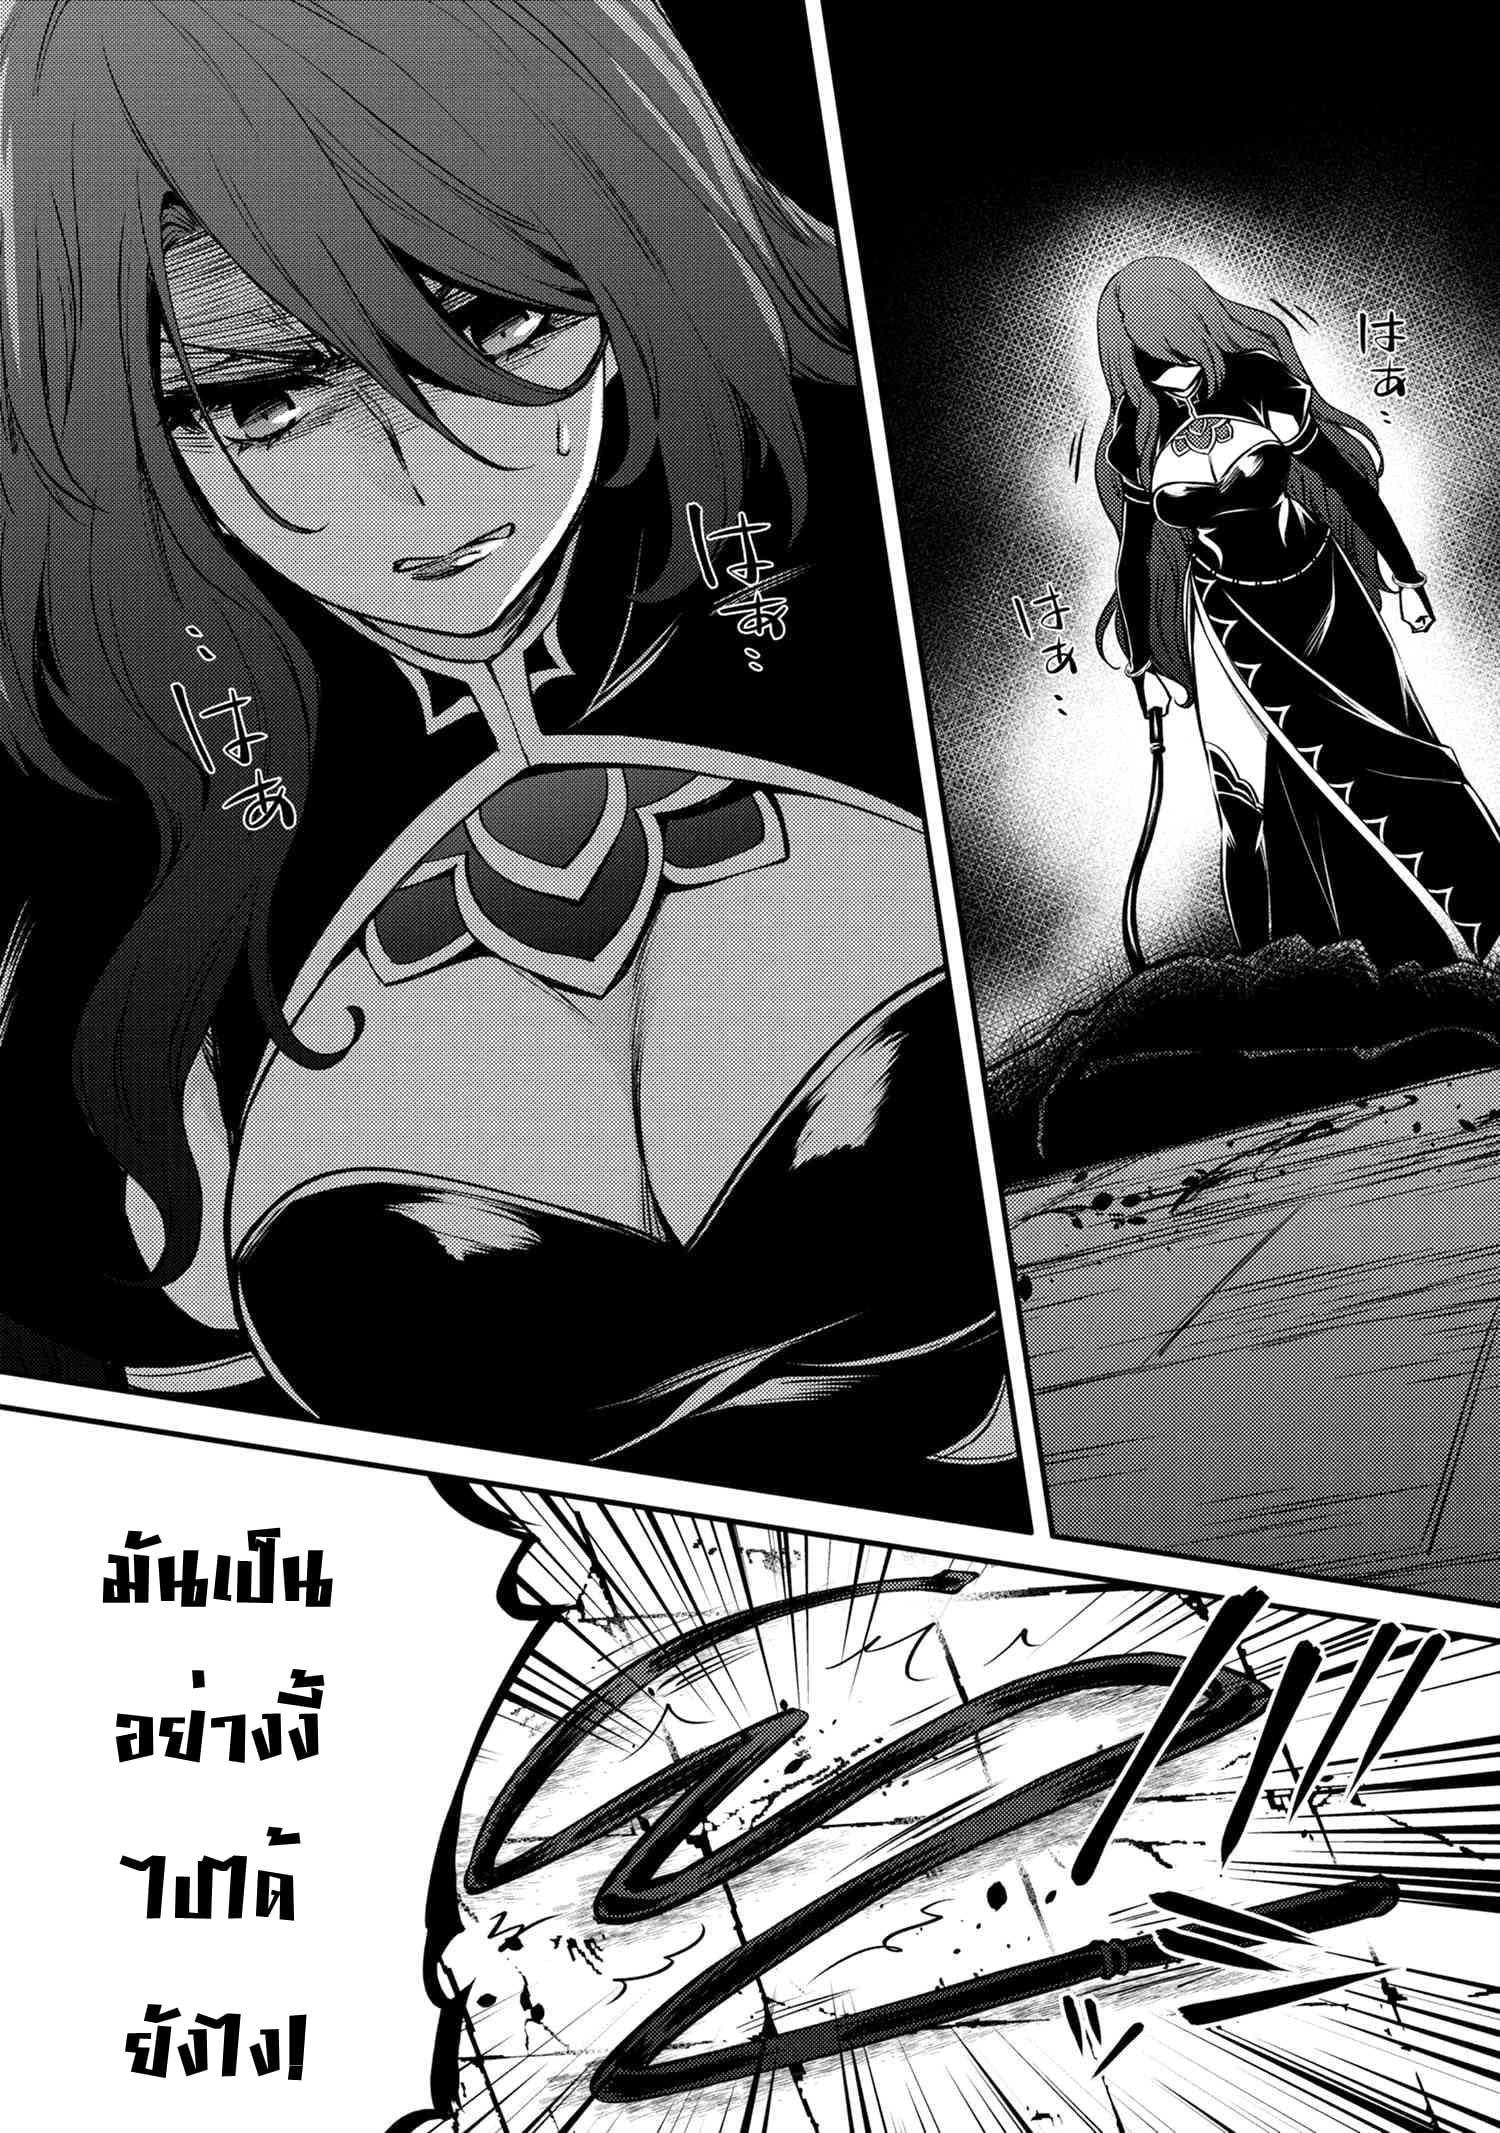 The Strongest Dull Princeรขโฌโขs Secret Battle for the Throne ร ยธโ€ขร ยธยญร ยธโขร ยธโ€”ร ยธยตร ยนห 27.1 (3)